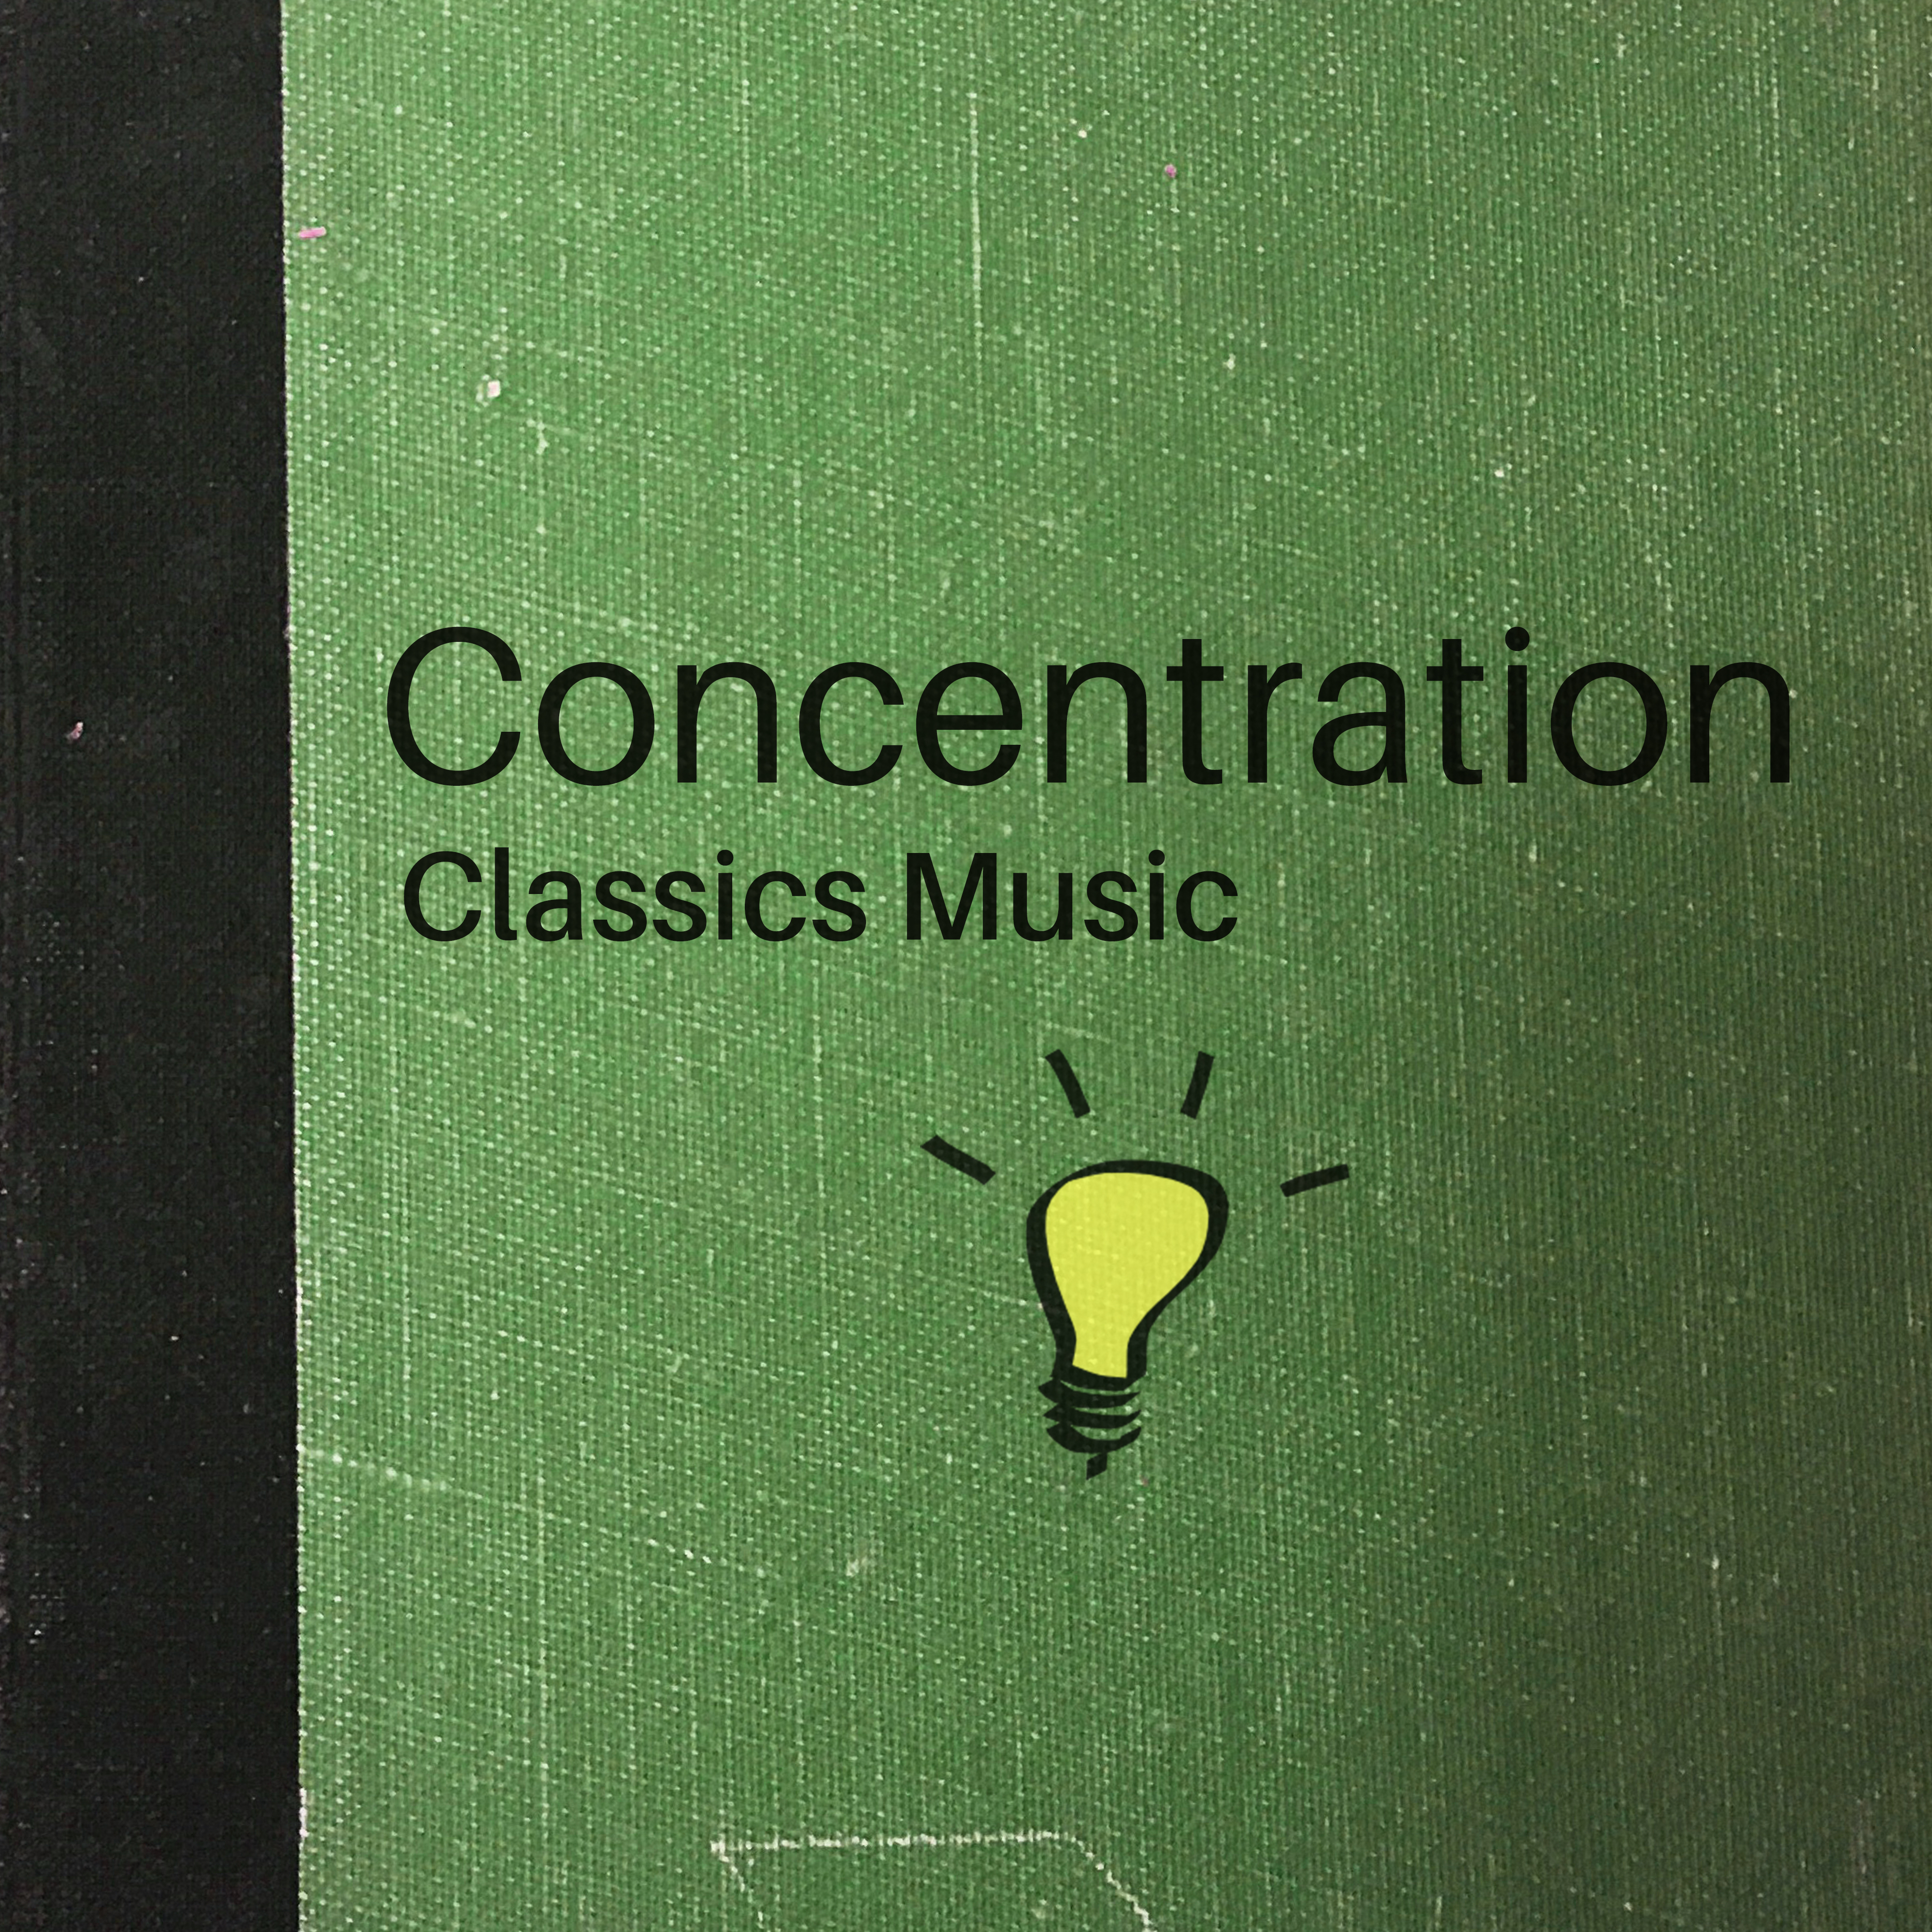 Concentration Classics Music – Soft Classical Songs, Easy Listening, Focus on Task